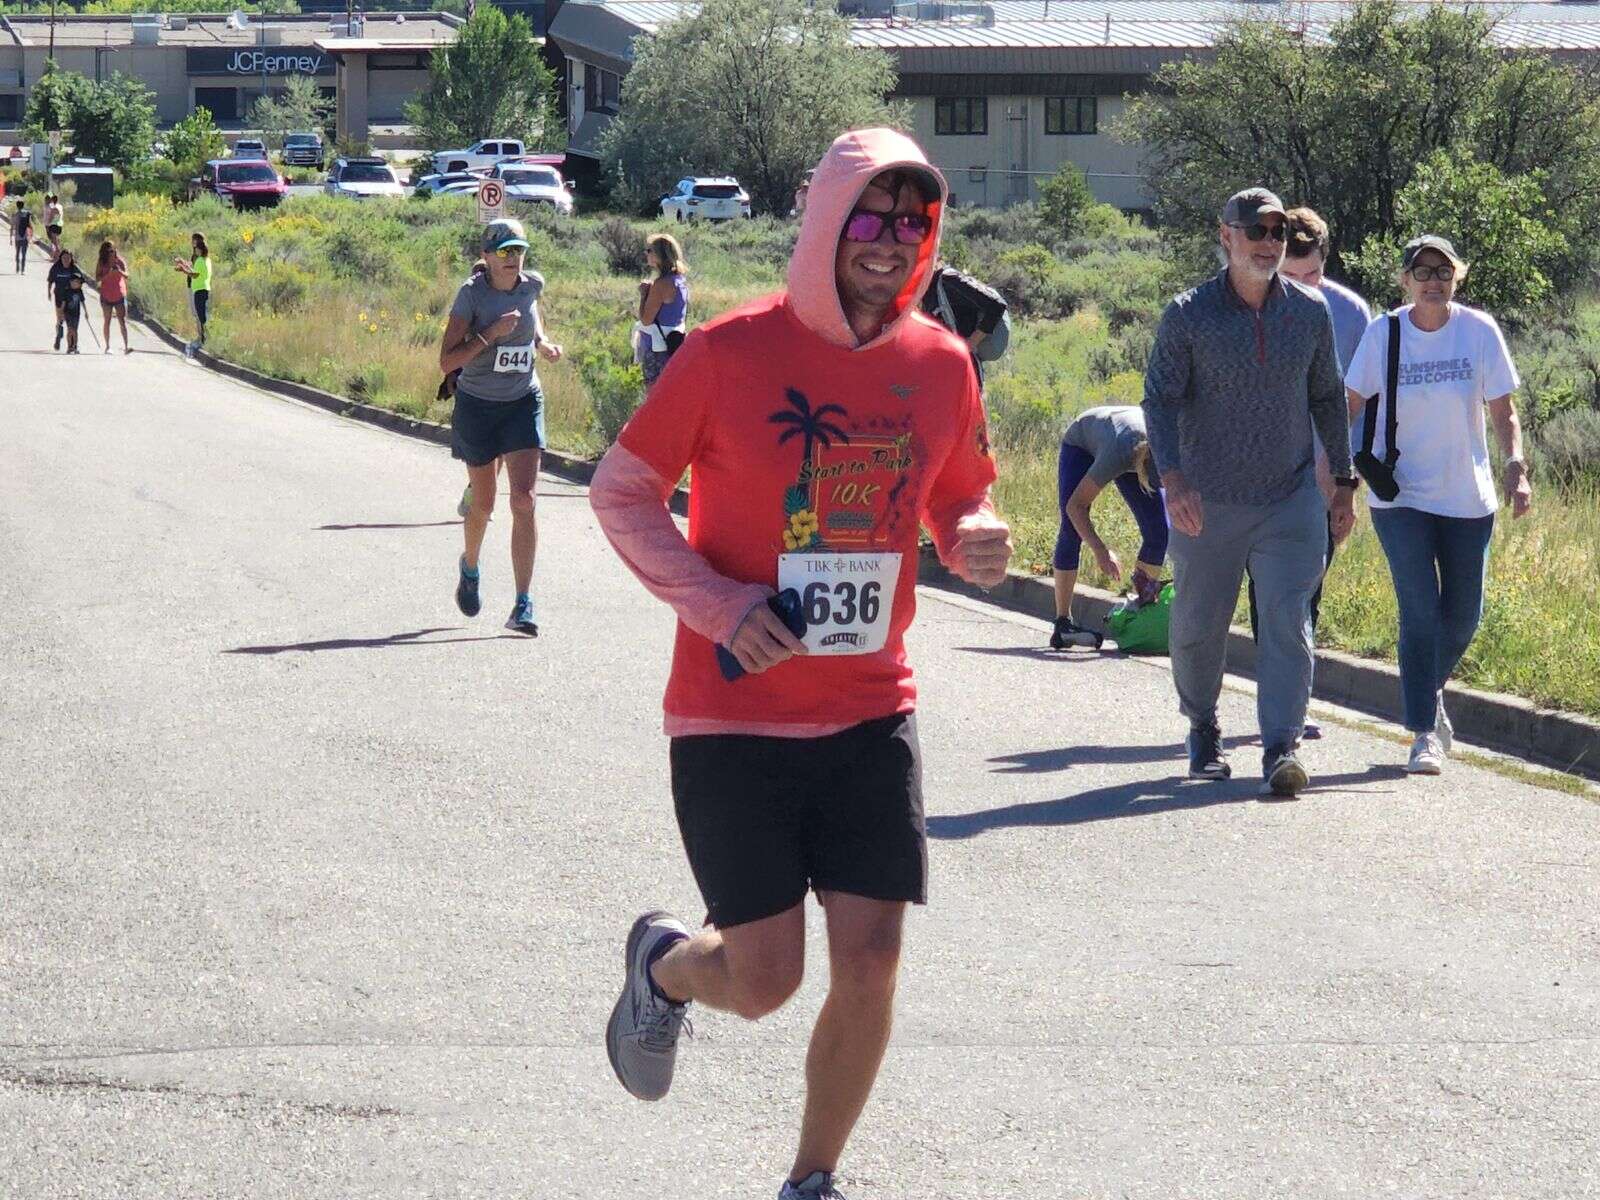 Traditional course returns for 9th annual Thirsty 13 Half Marathon - The Durango Herald